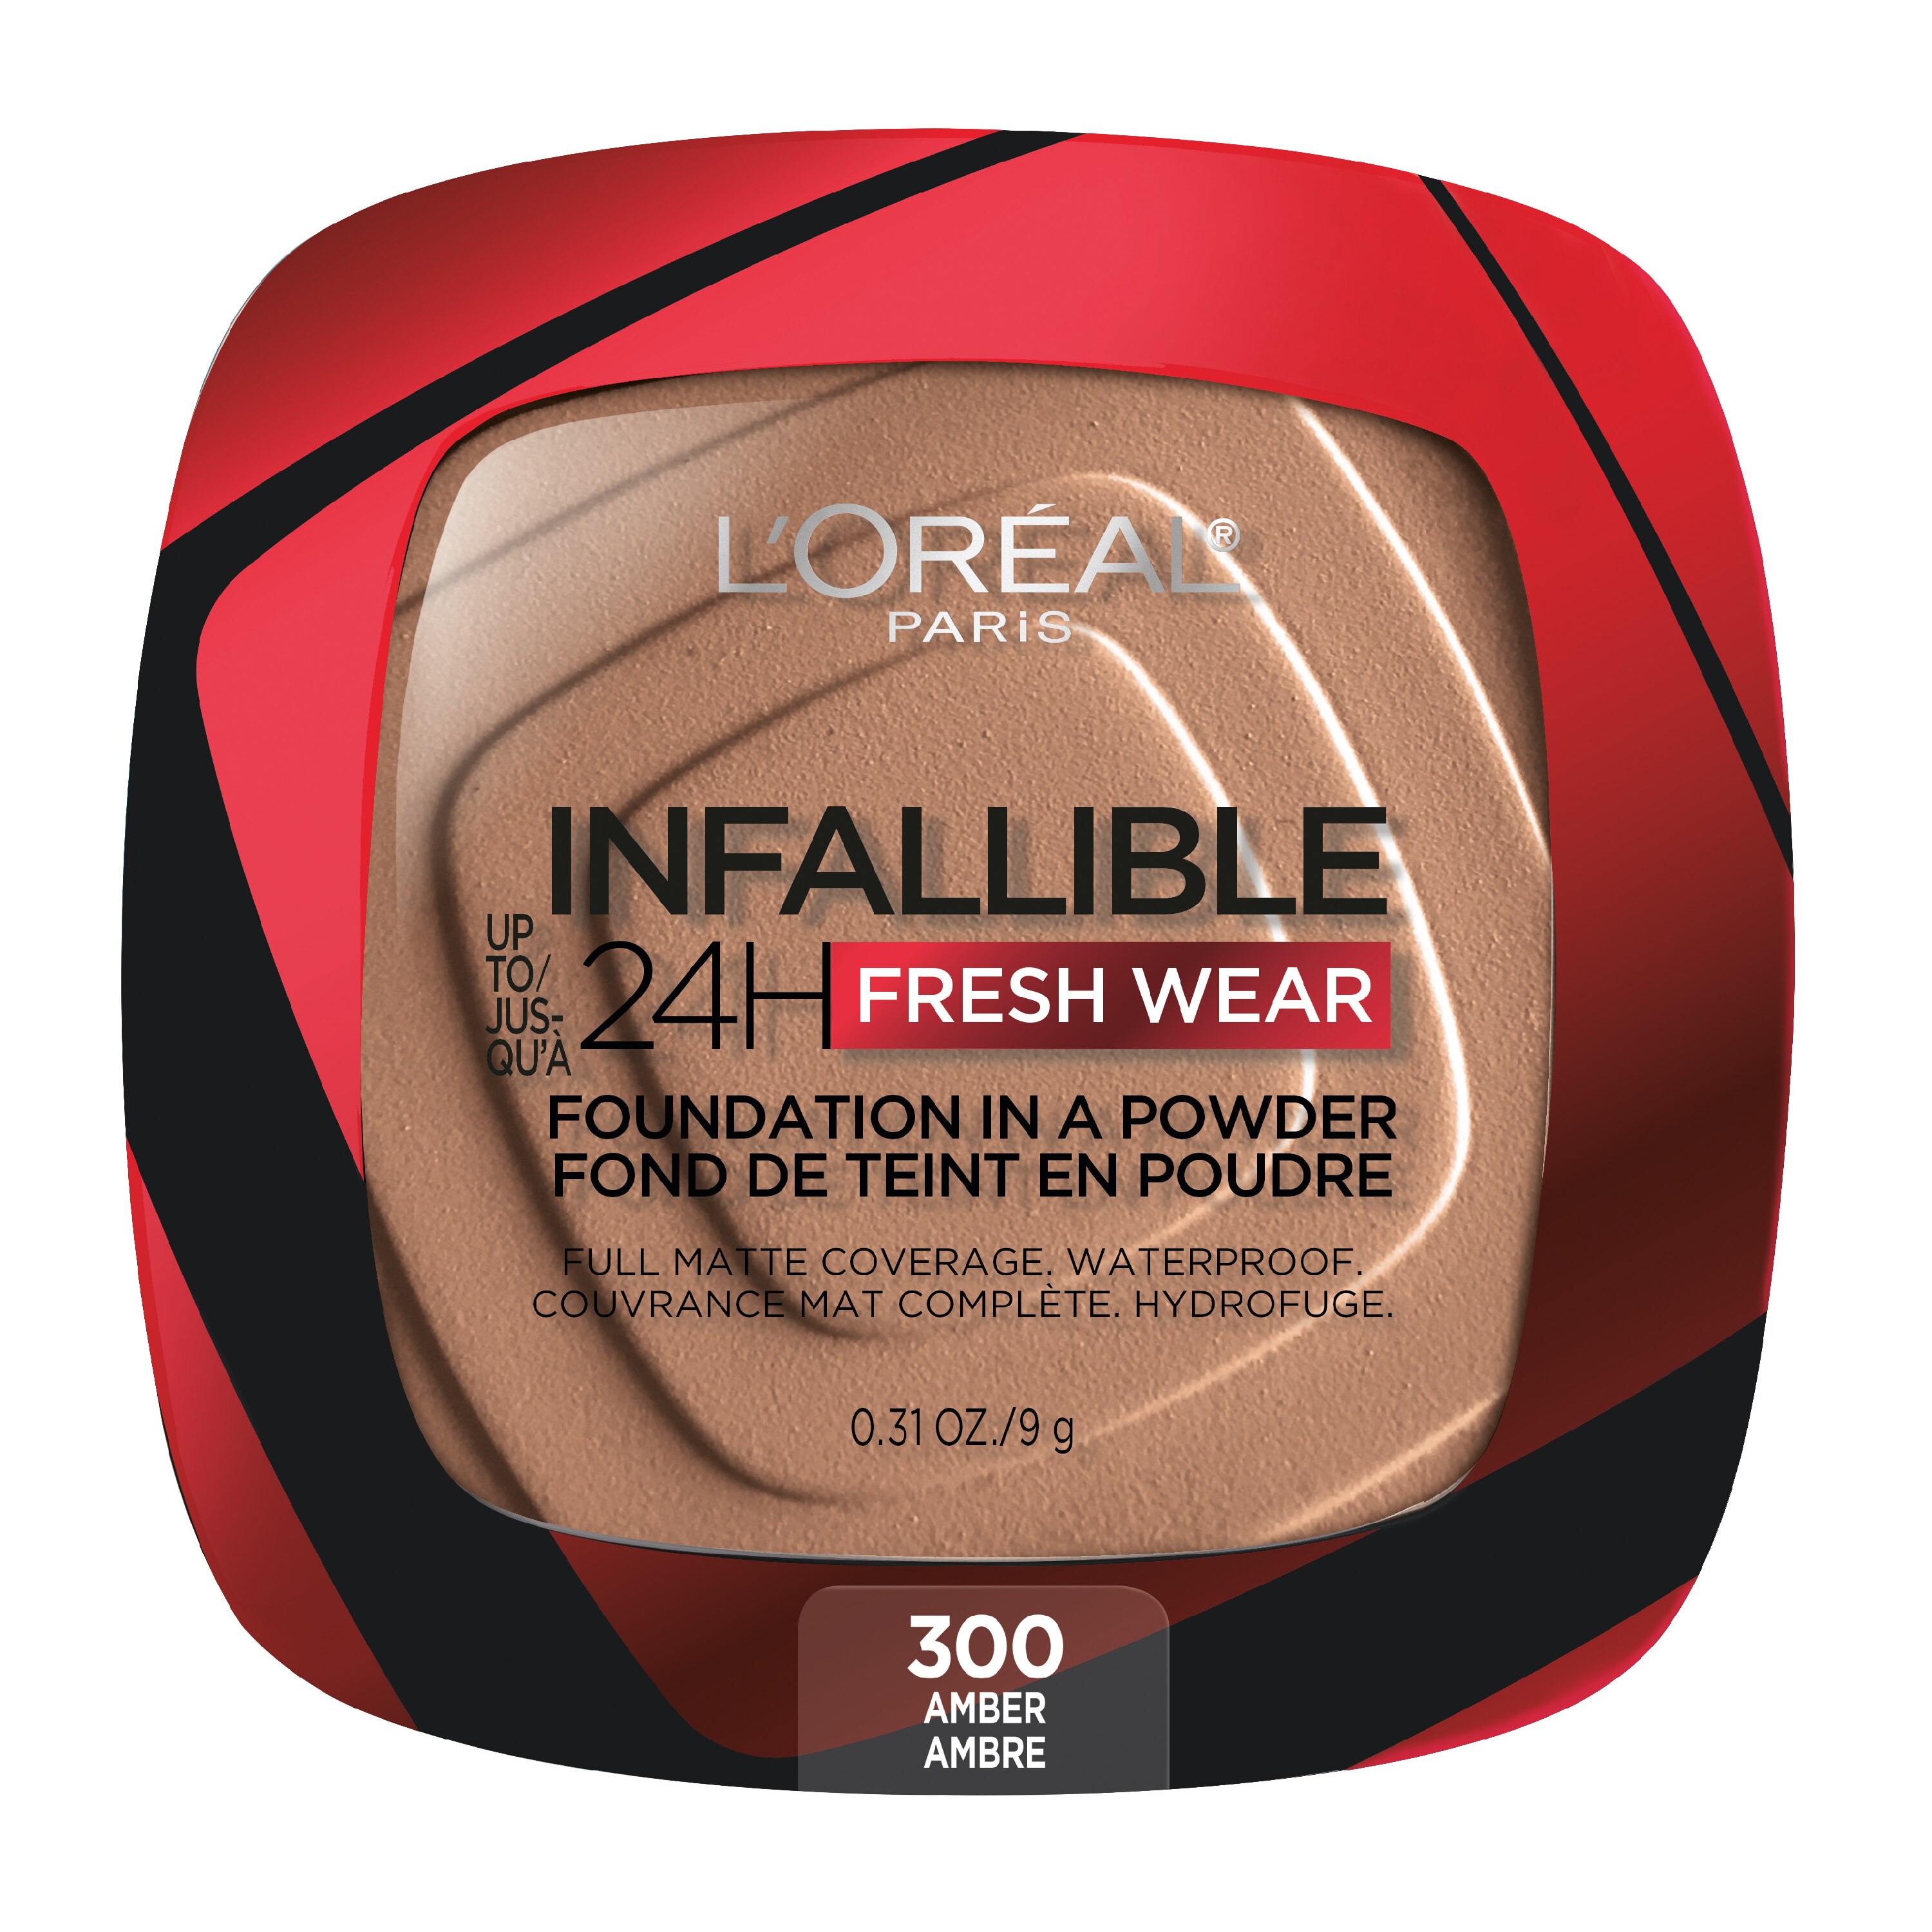 L'Oreal Paris Infallible Up To 24H Fresh Wear Foundation In A Powder, Amber-300, 0.31 Oz , CVS